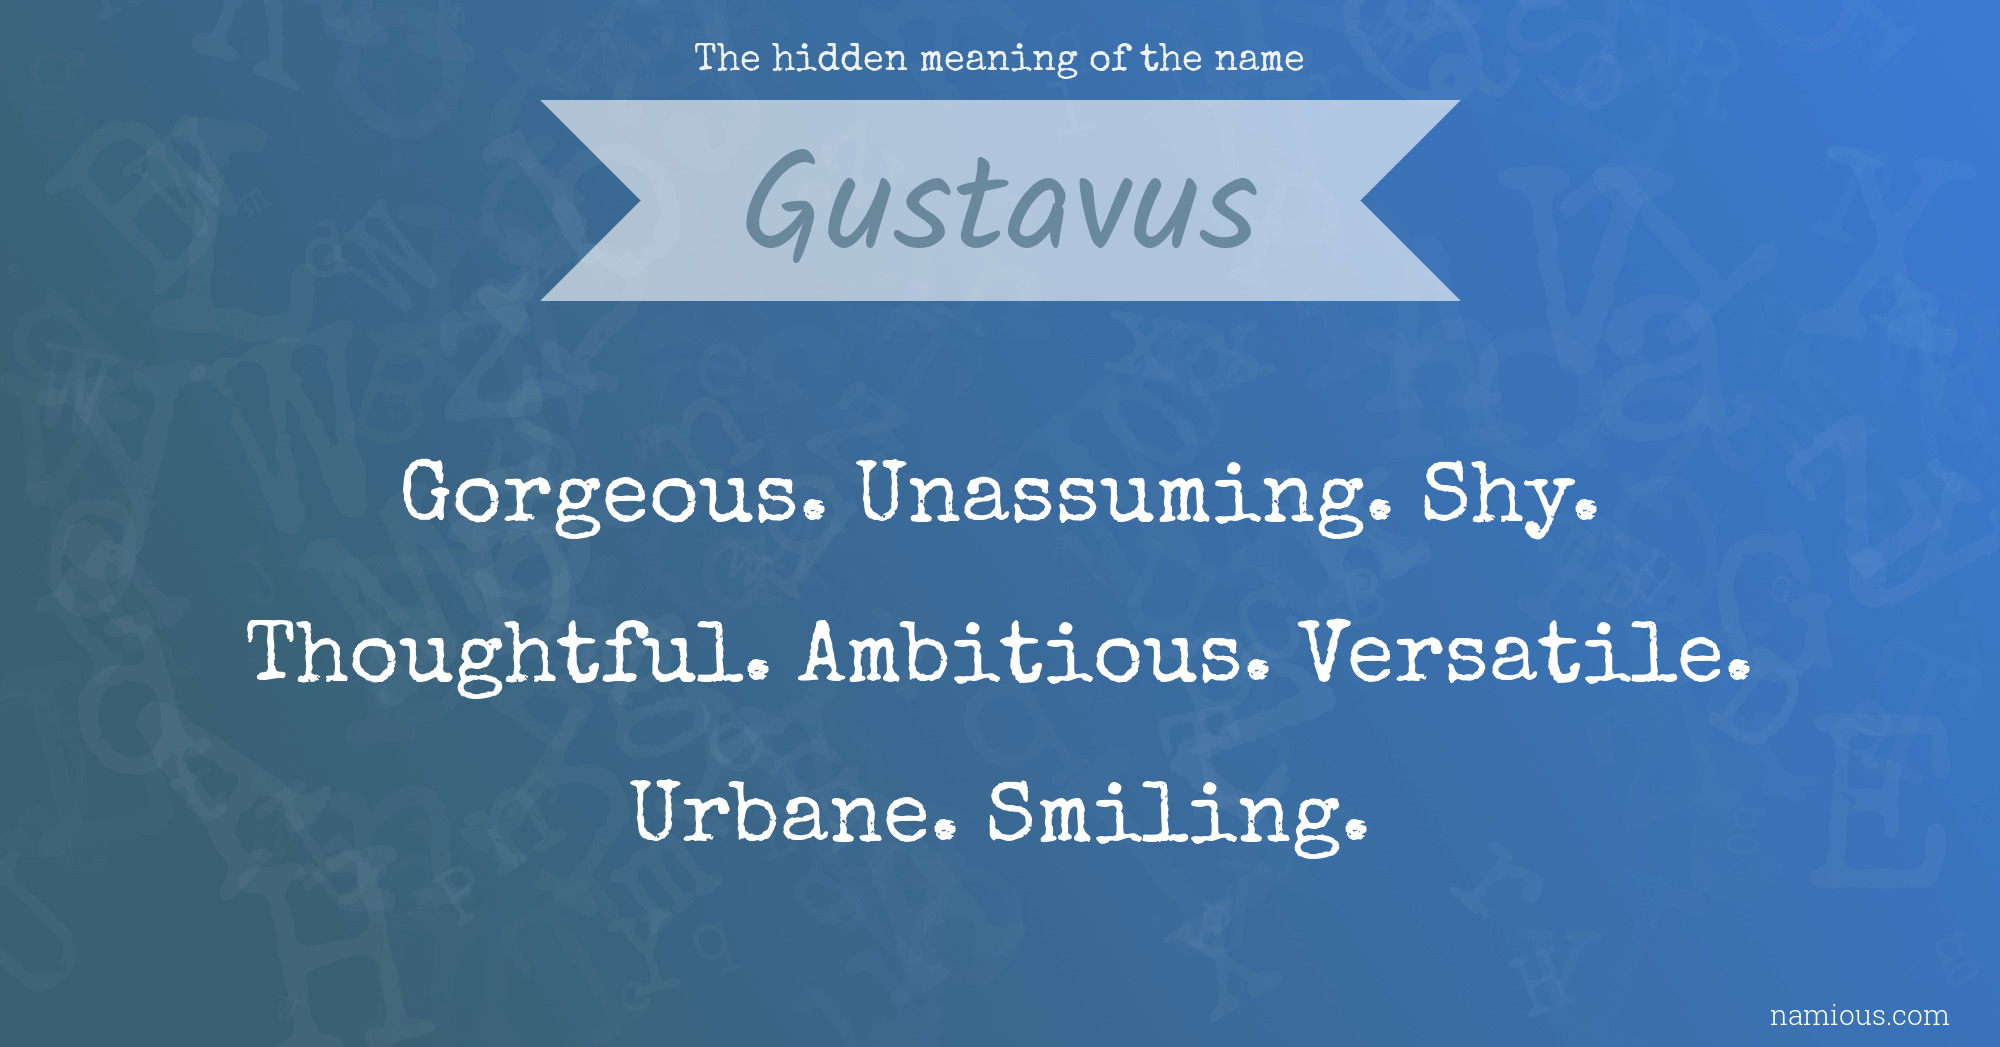 The hidden meaning of the name Gustavus